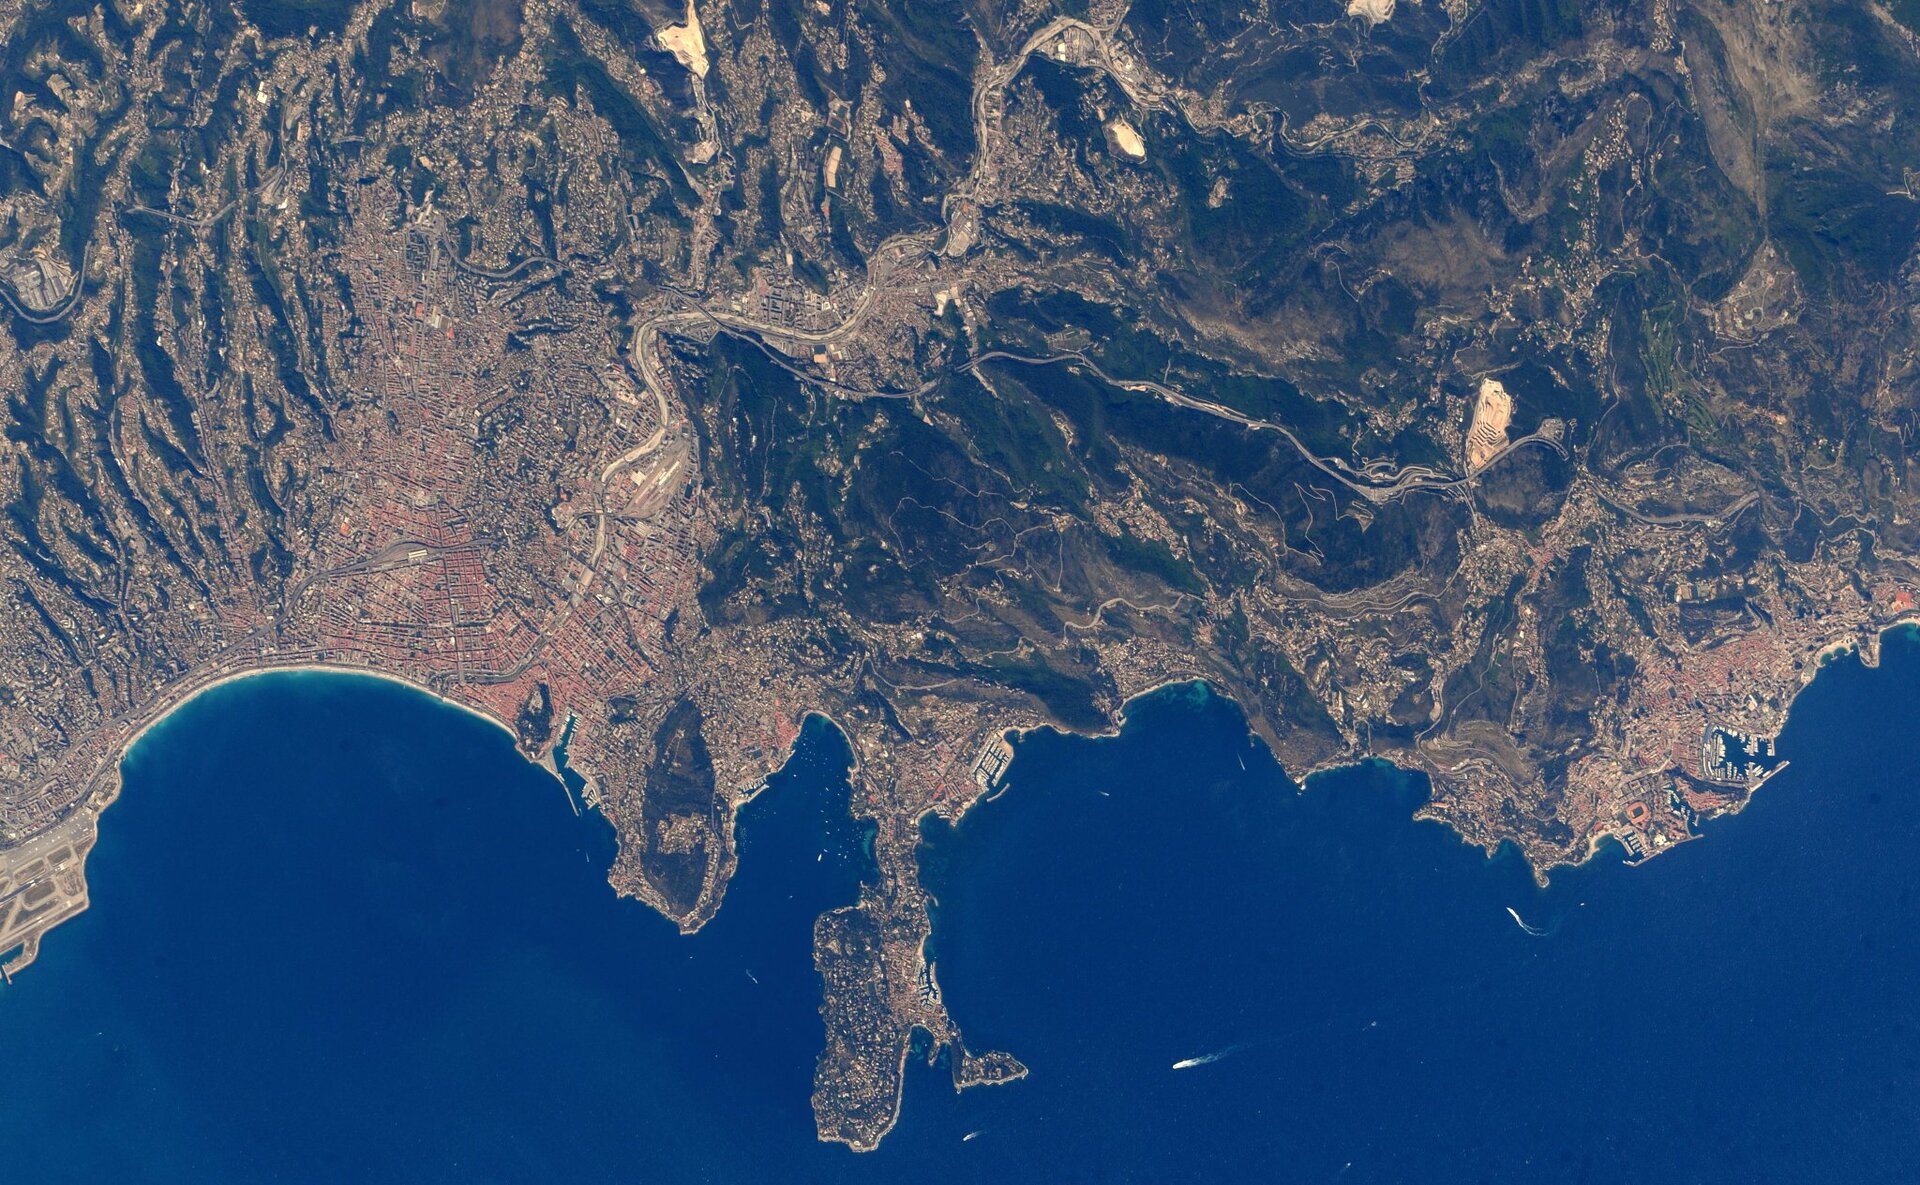 Nice (France) and Monaco photographed from the ISS